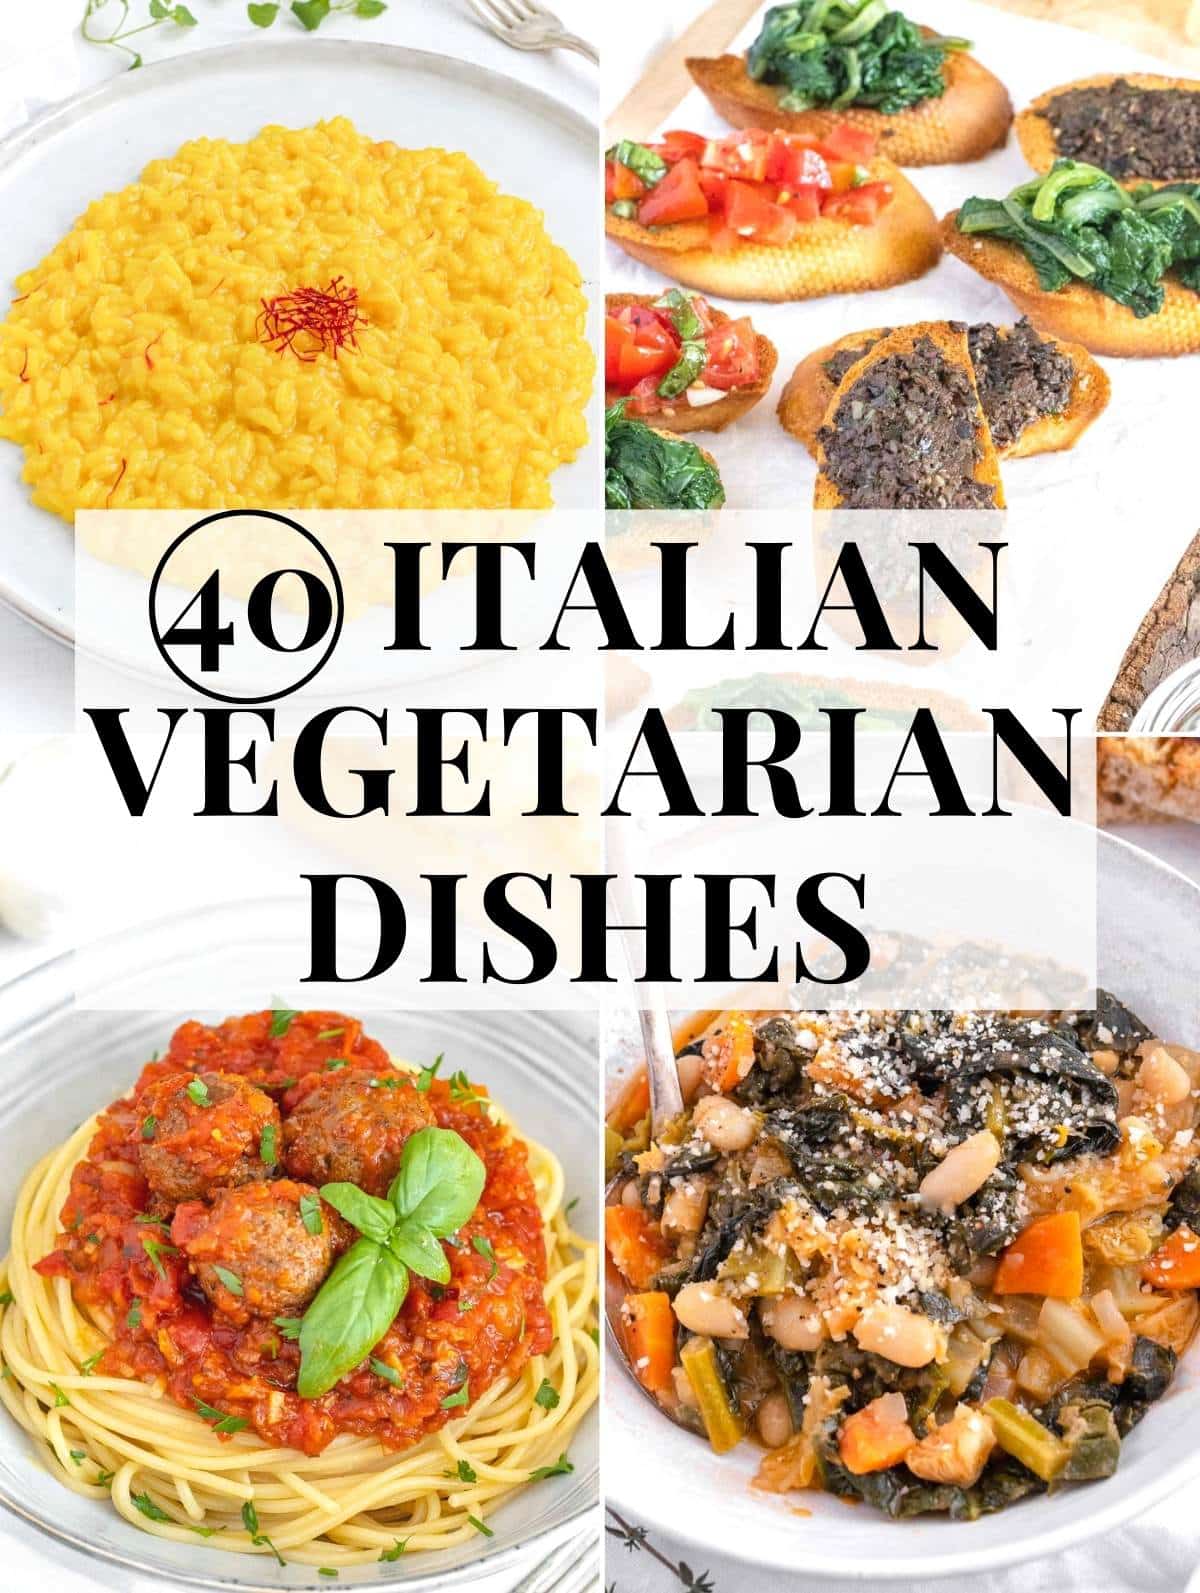 Italian vegetarian dishes including risotto, pasta and soups